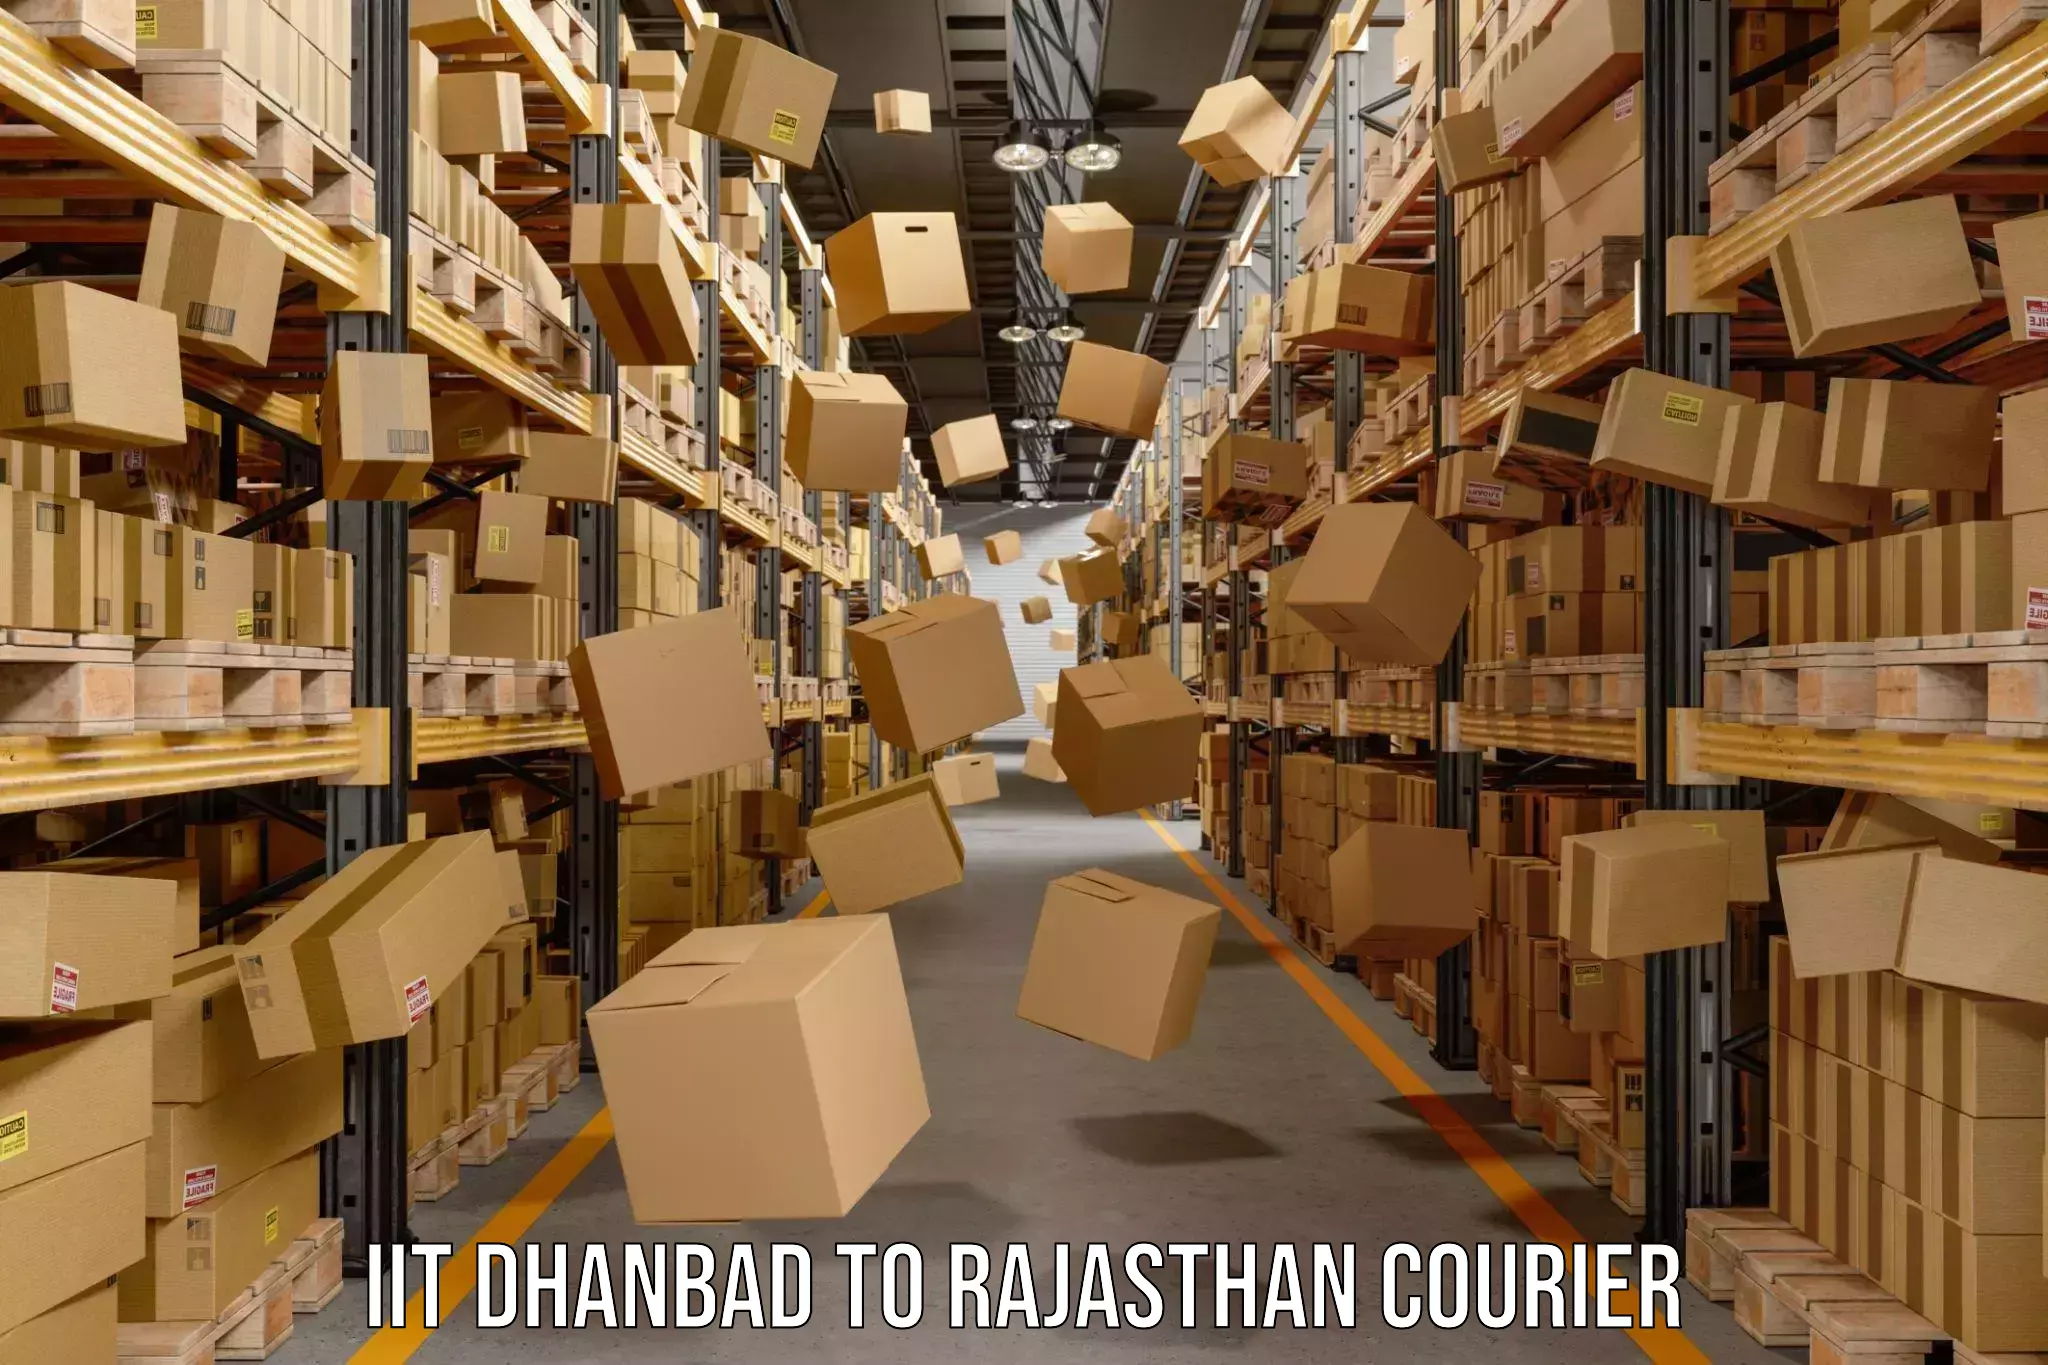 Reliable parcel services IIT Dhanbad to Bonli